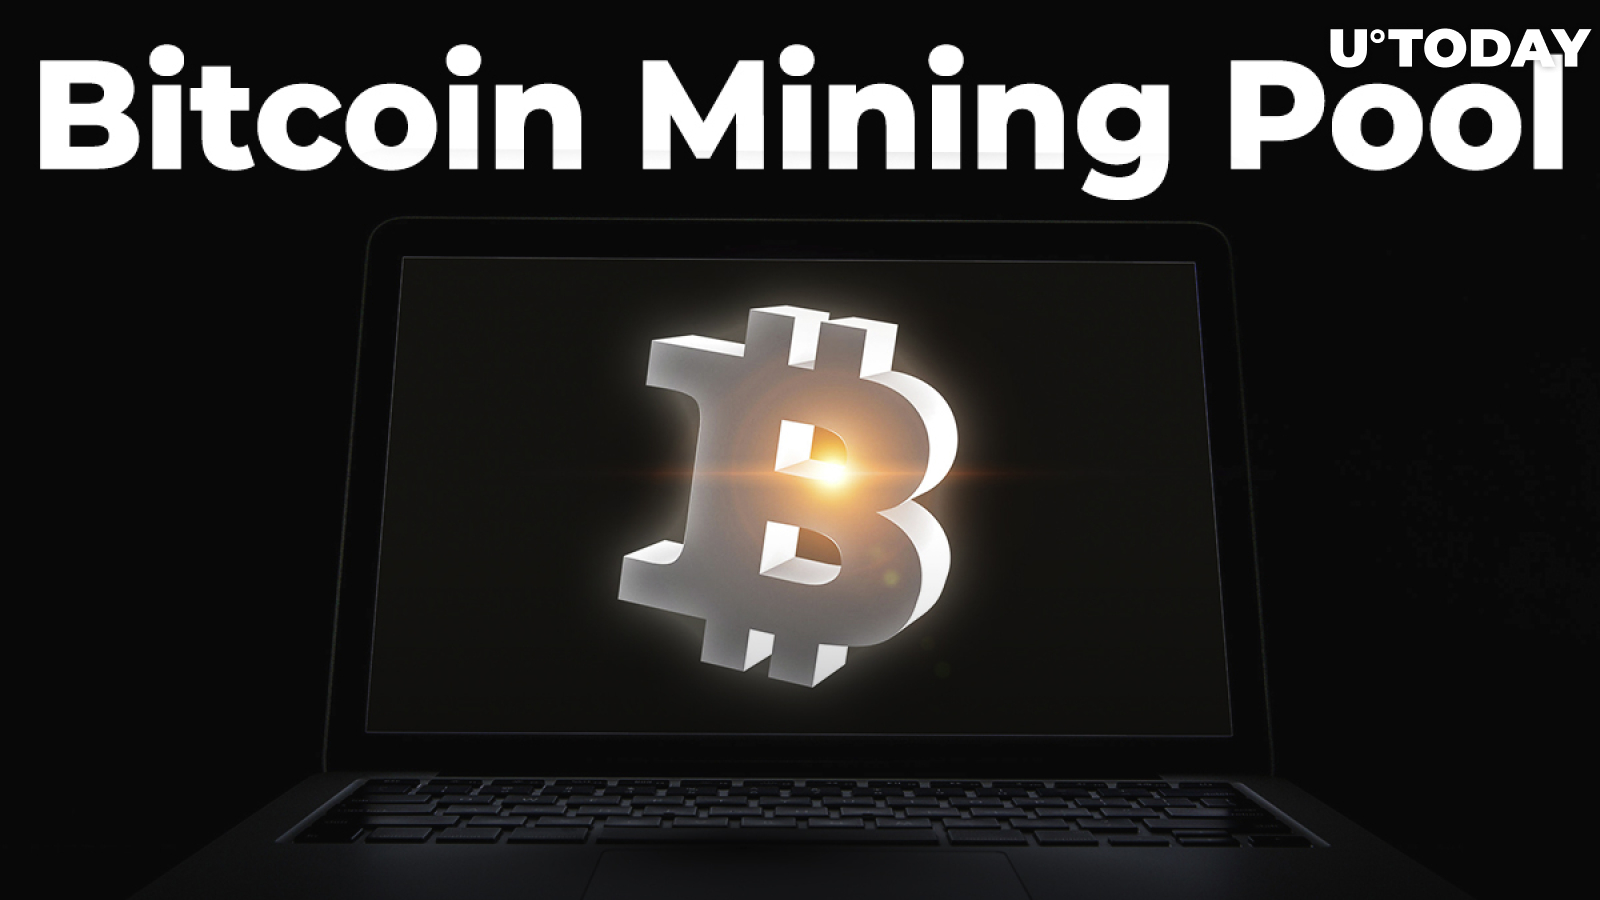 First Bitcoin Mining Pool Releases New Specifications: Details